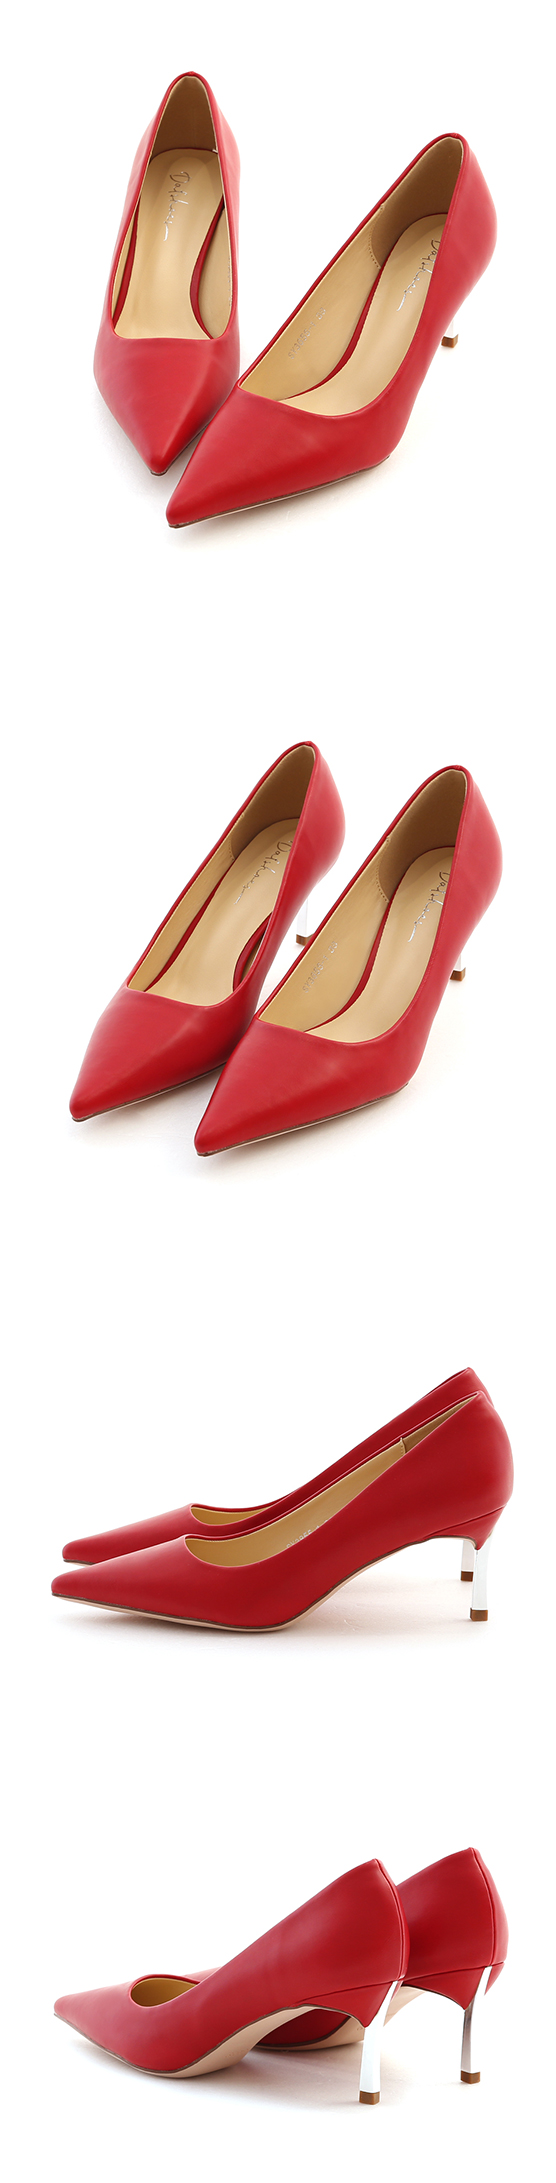 Plain Pointed Toe 6cm High-Heels Red